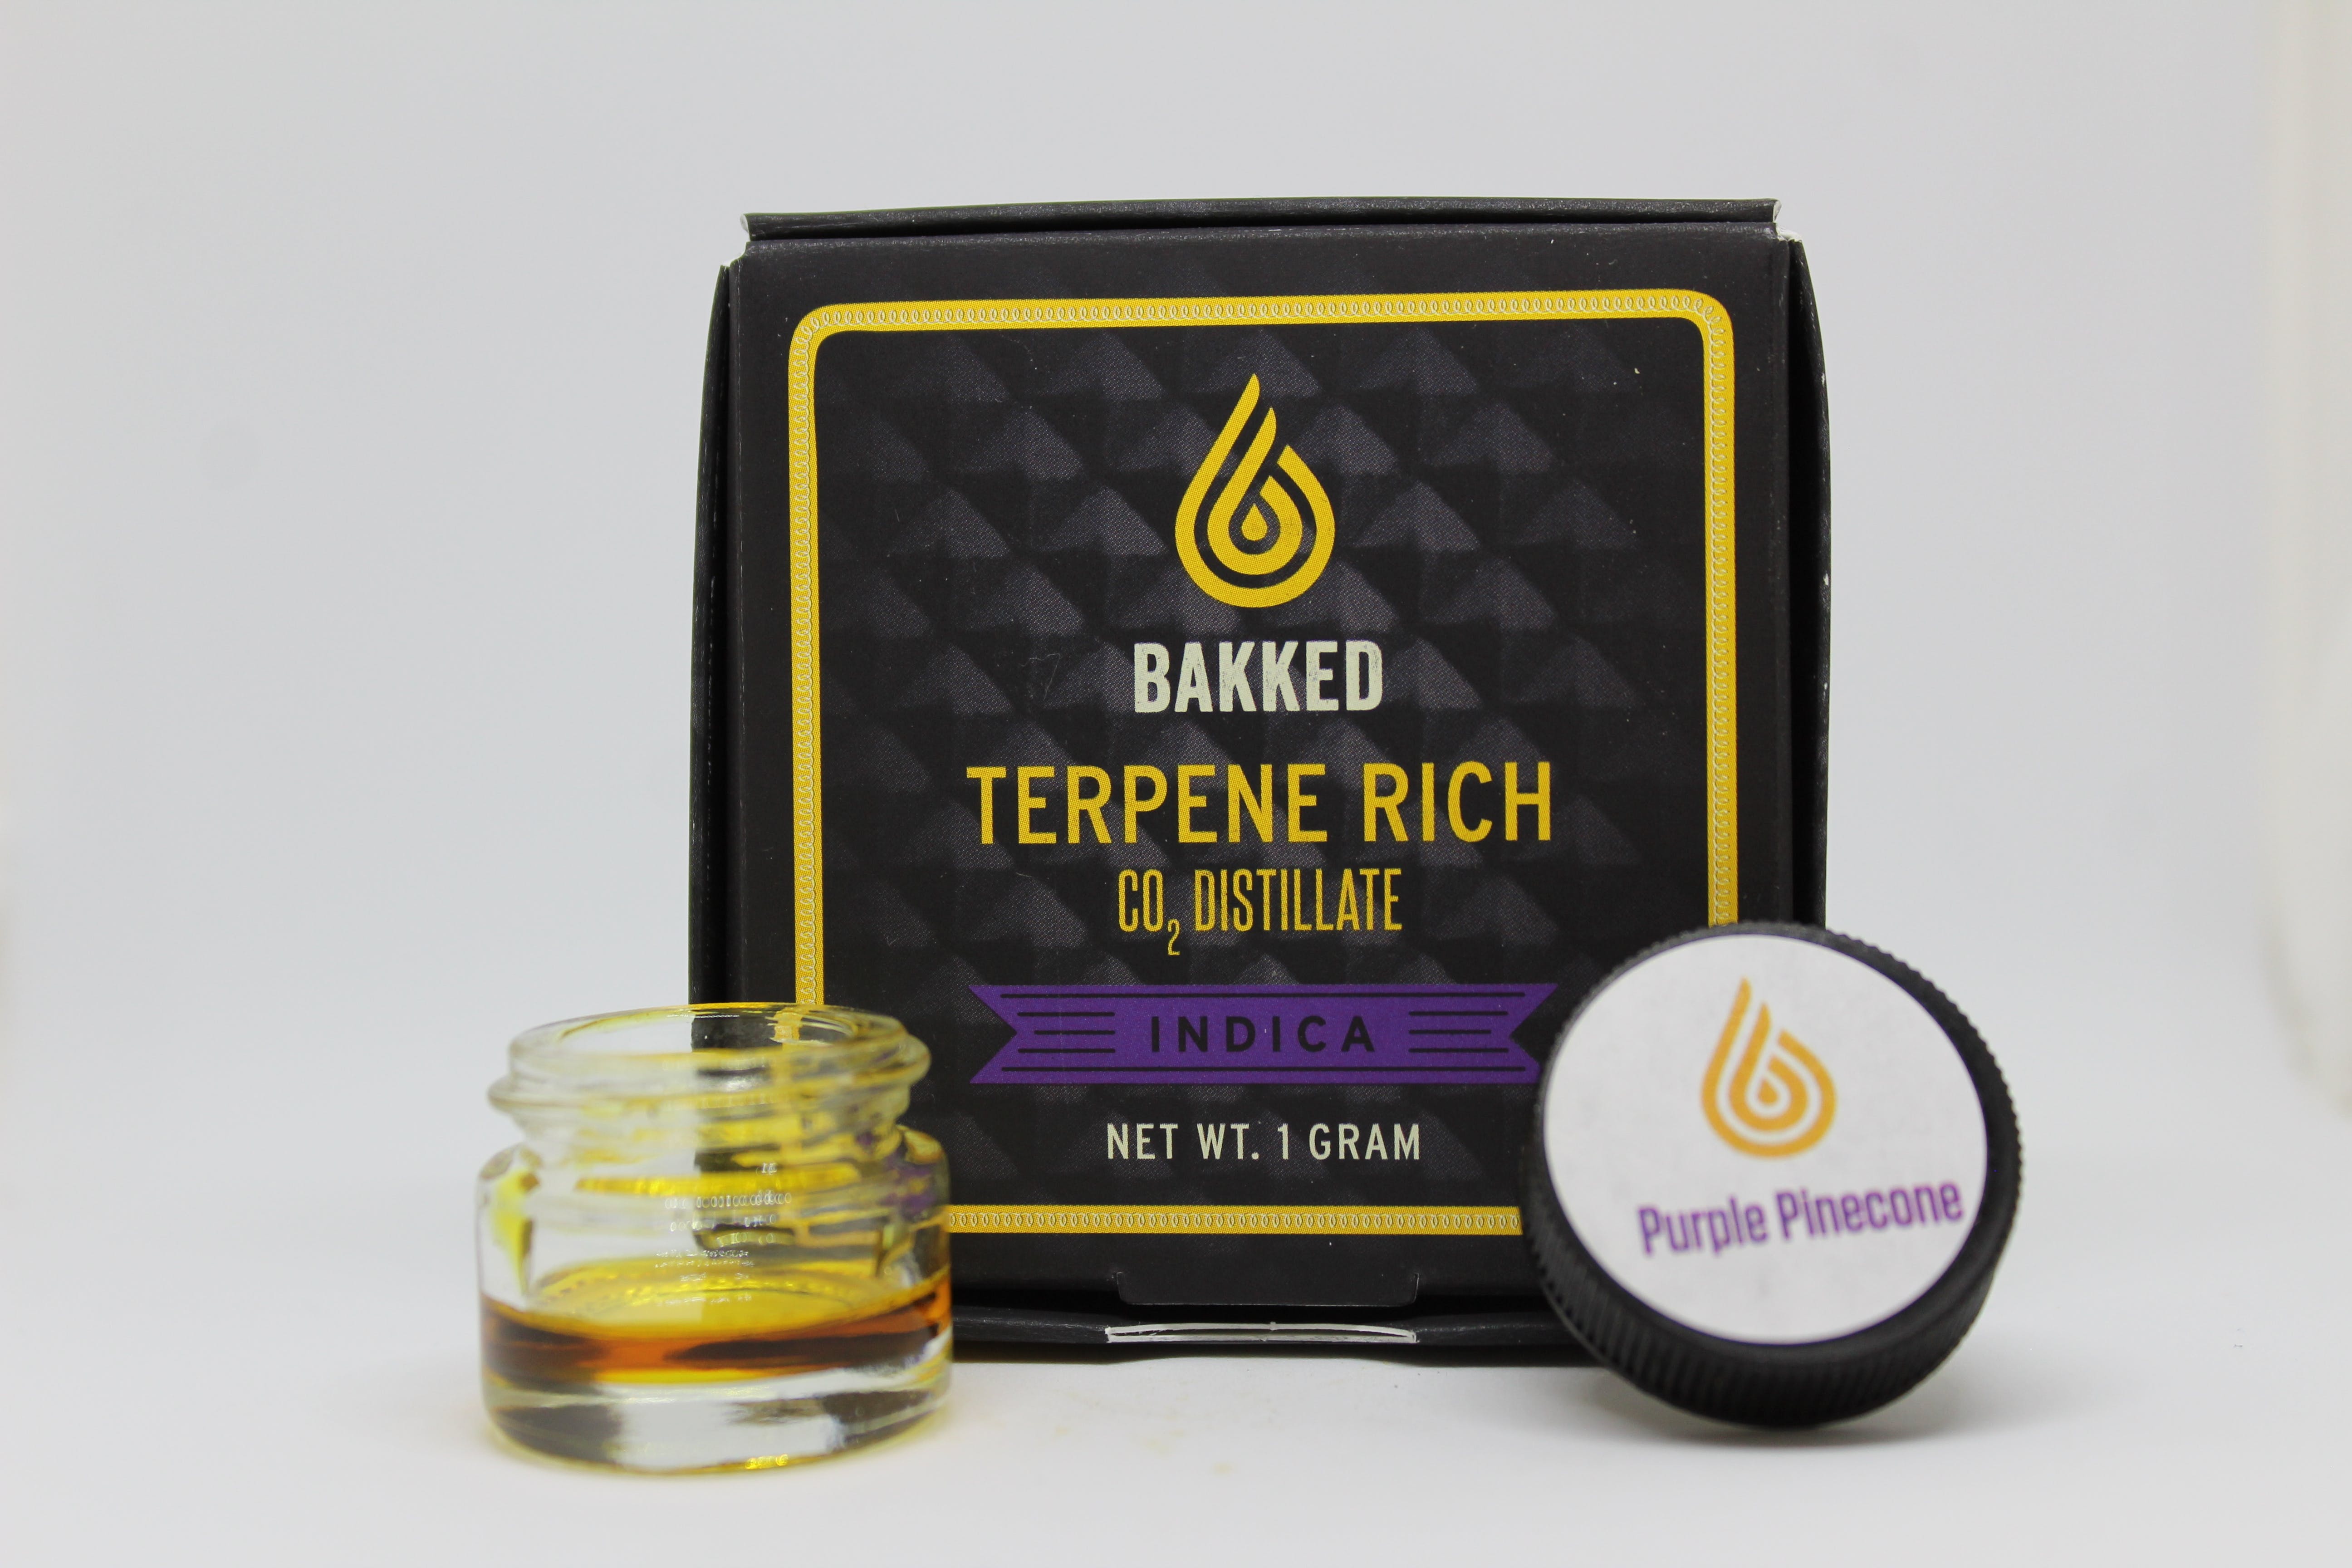 concentrate-bakked-terpene-rich-co2-distillate-1-g-tax-included